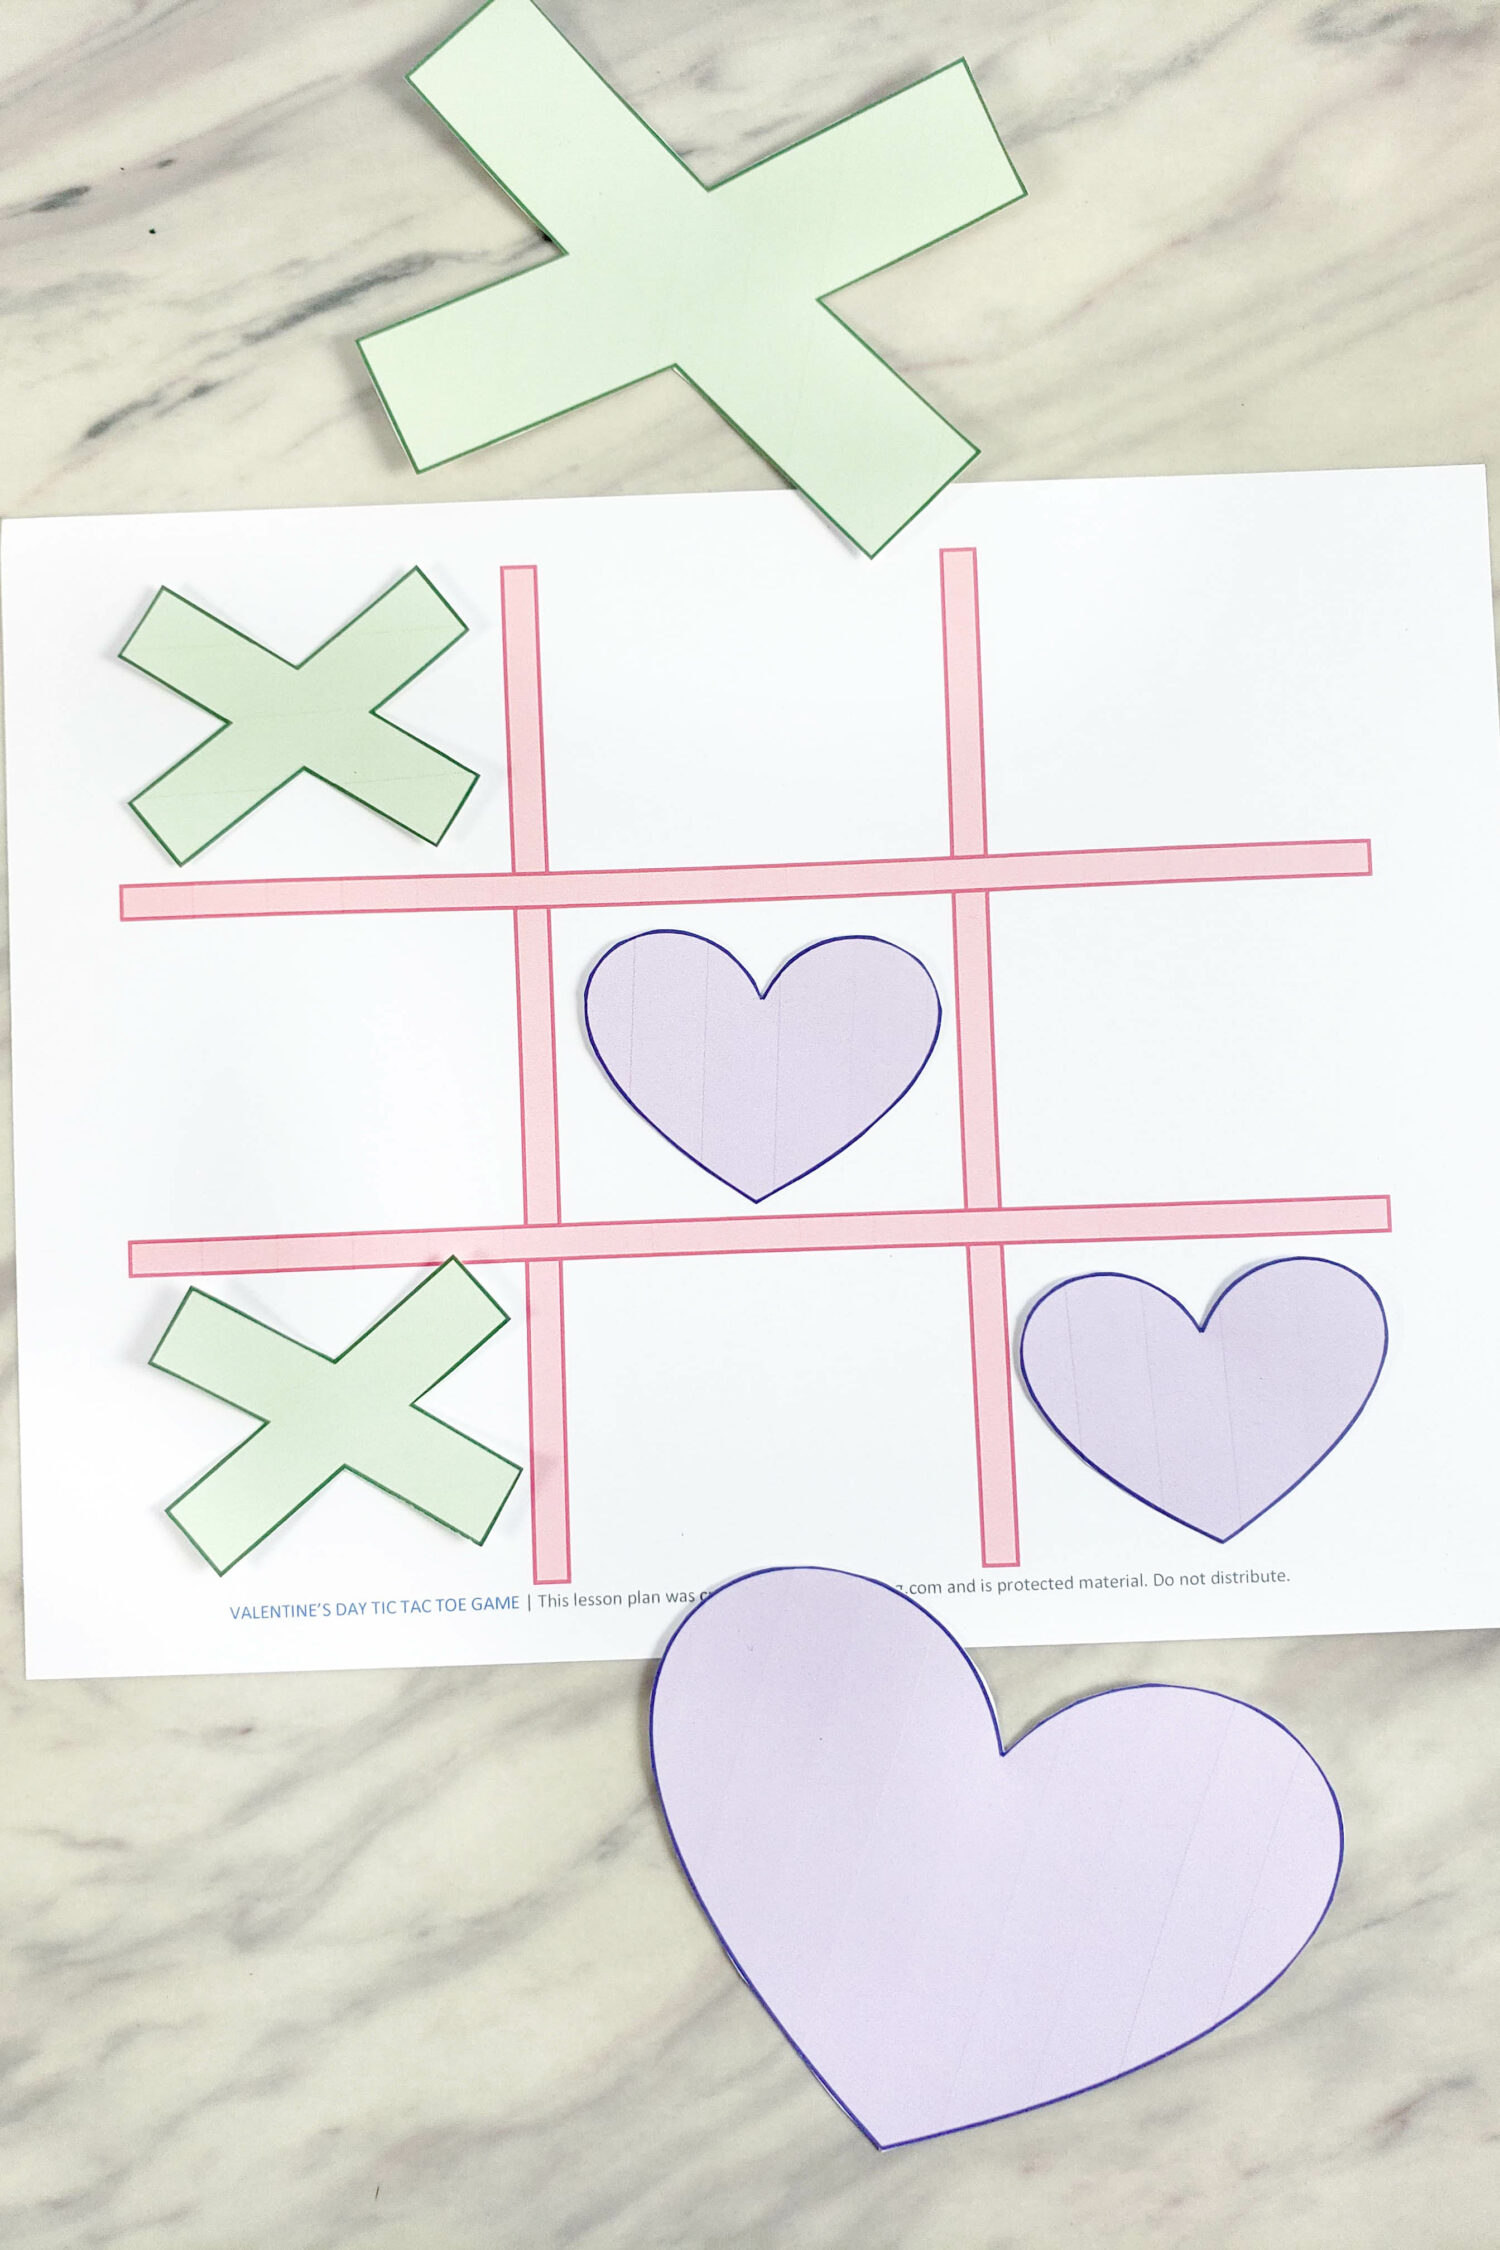 Valentine's Day tic tac toe game printable Primary singing time ideas for Valentine's Day